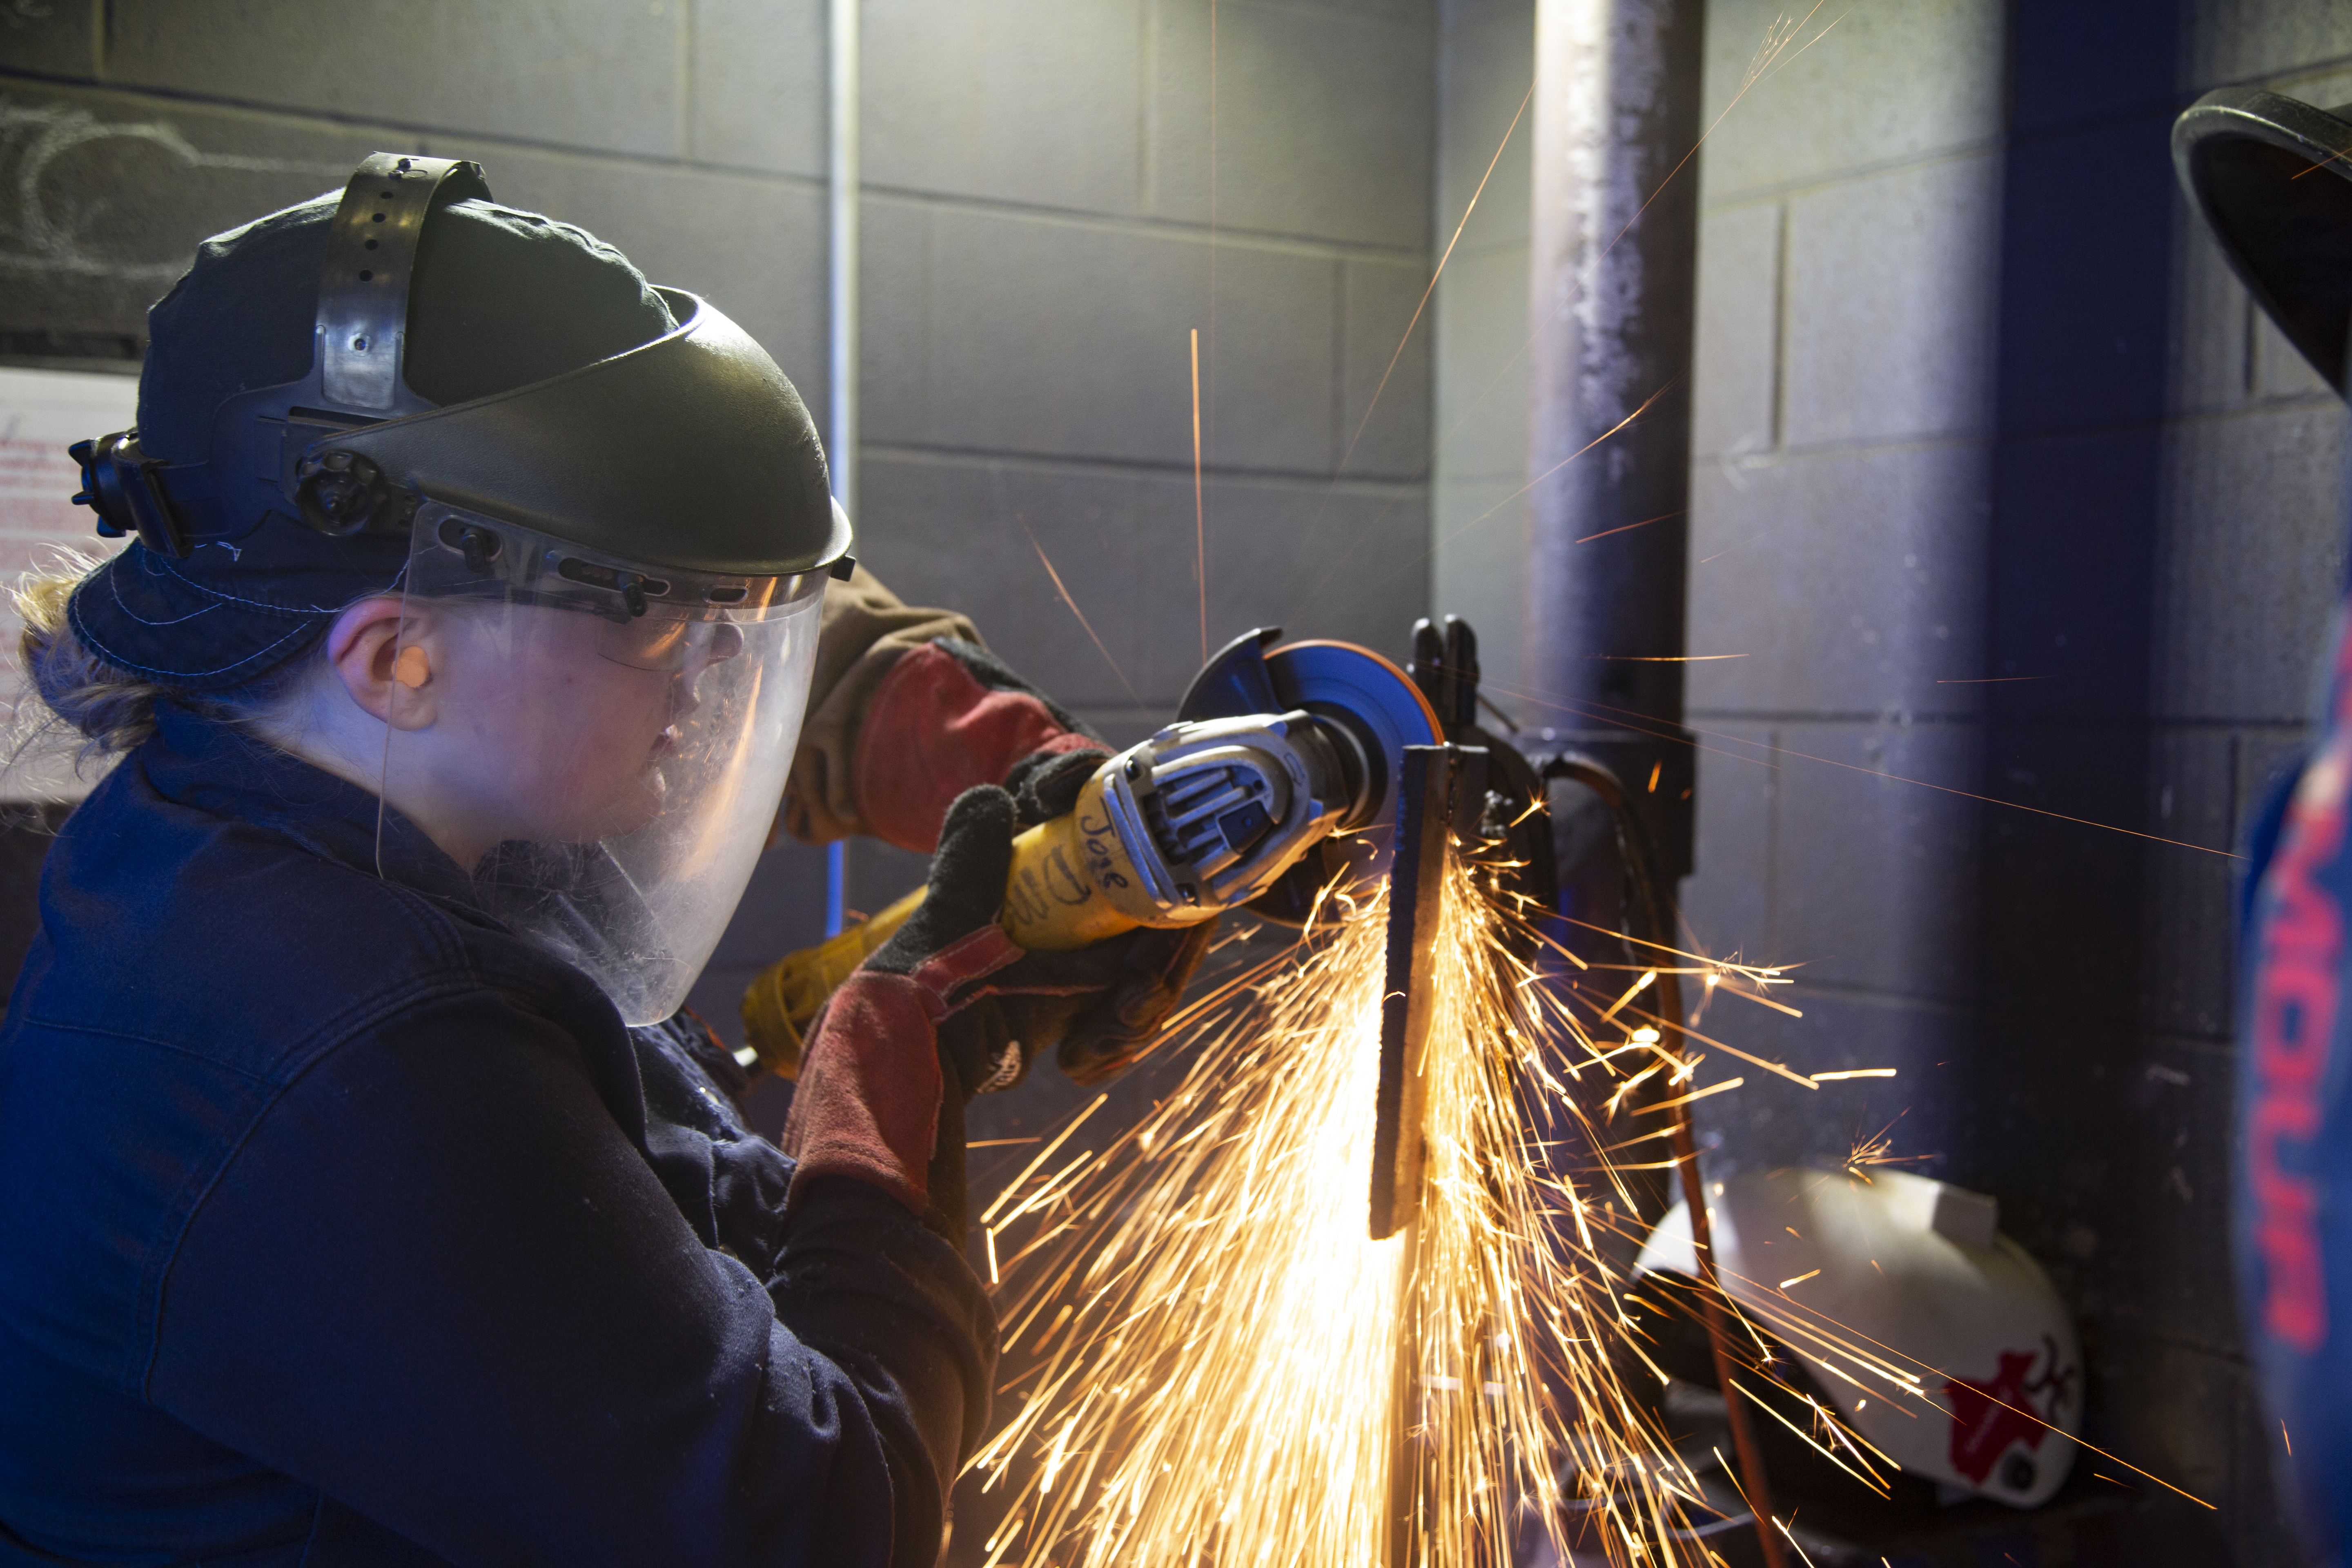 Woman welding a metal plate with sparks flying